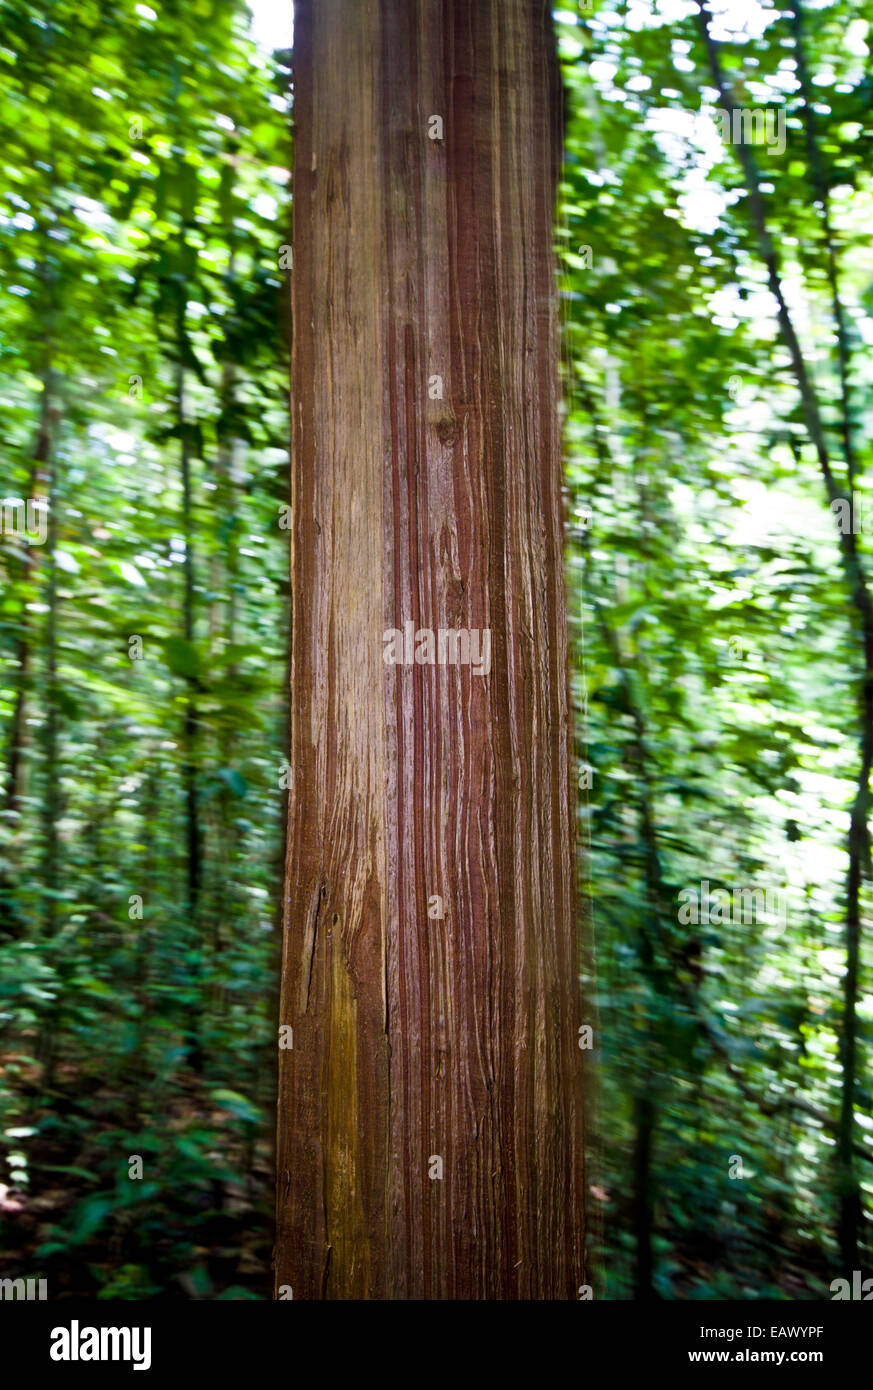 Linear bark lines on a tree trunk in the Amazon rainforest. Stock Photo